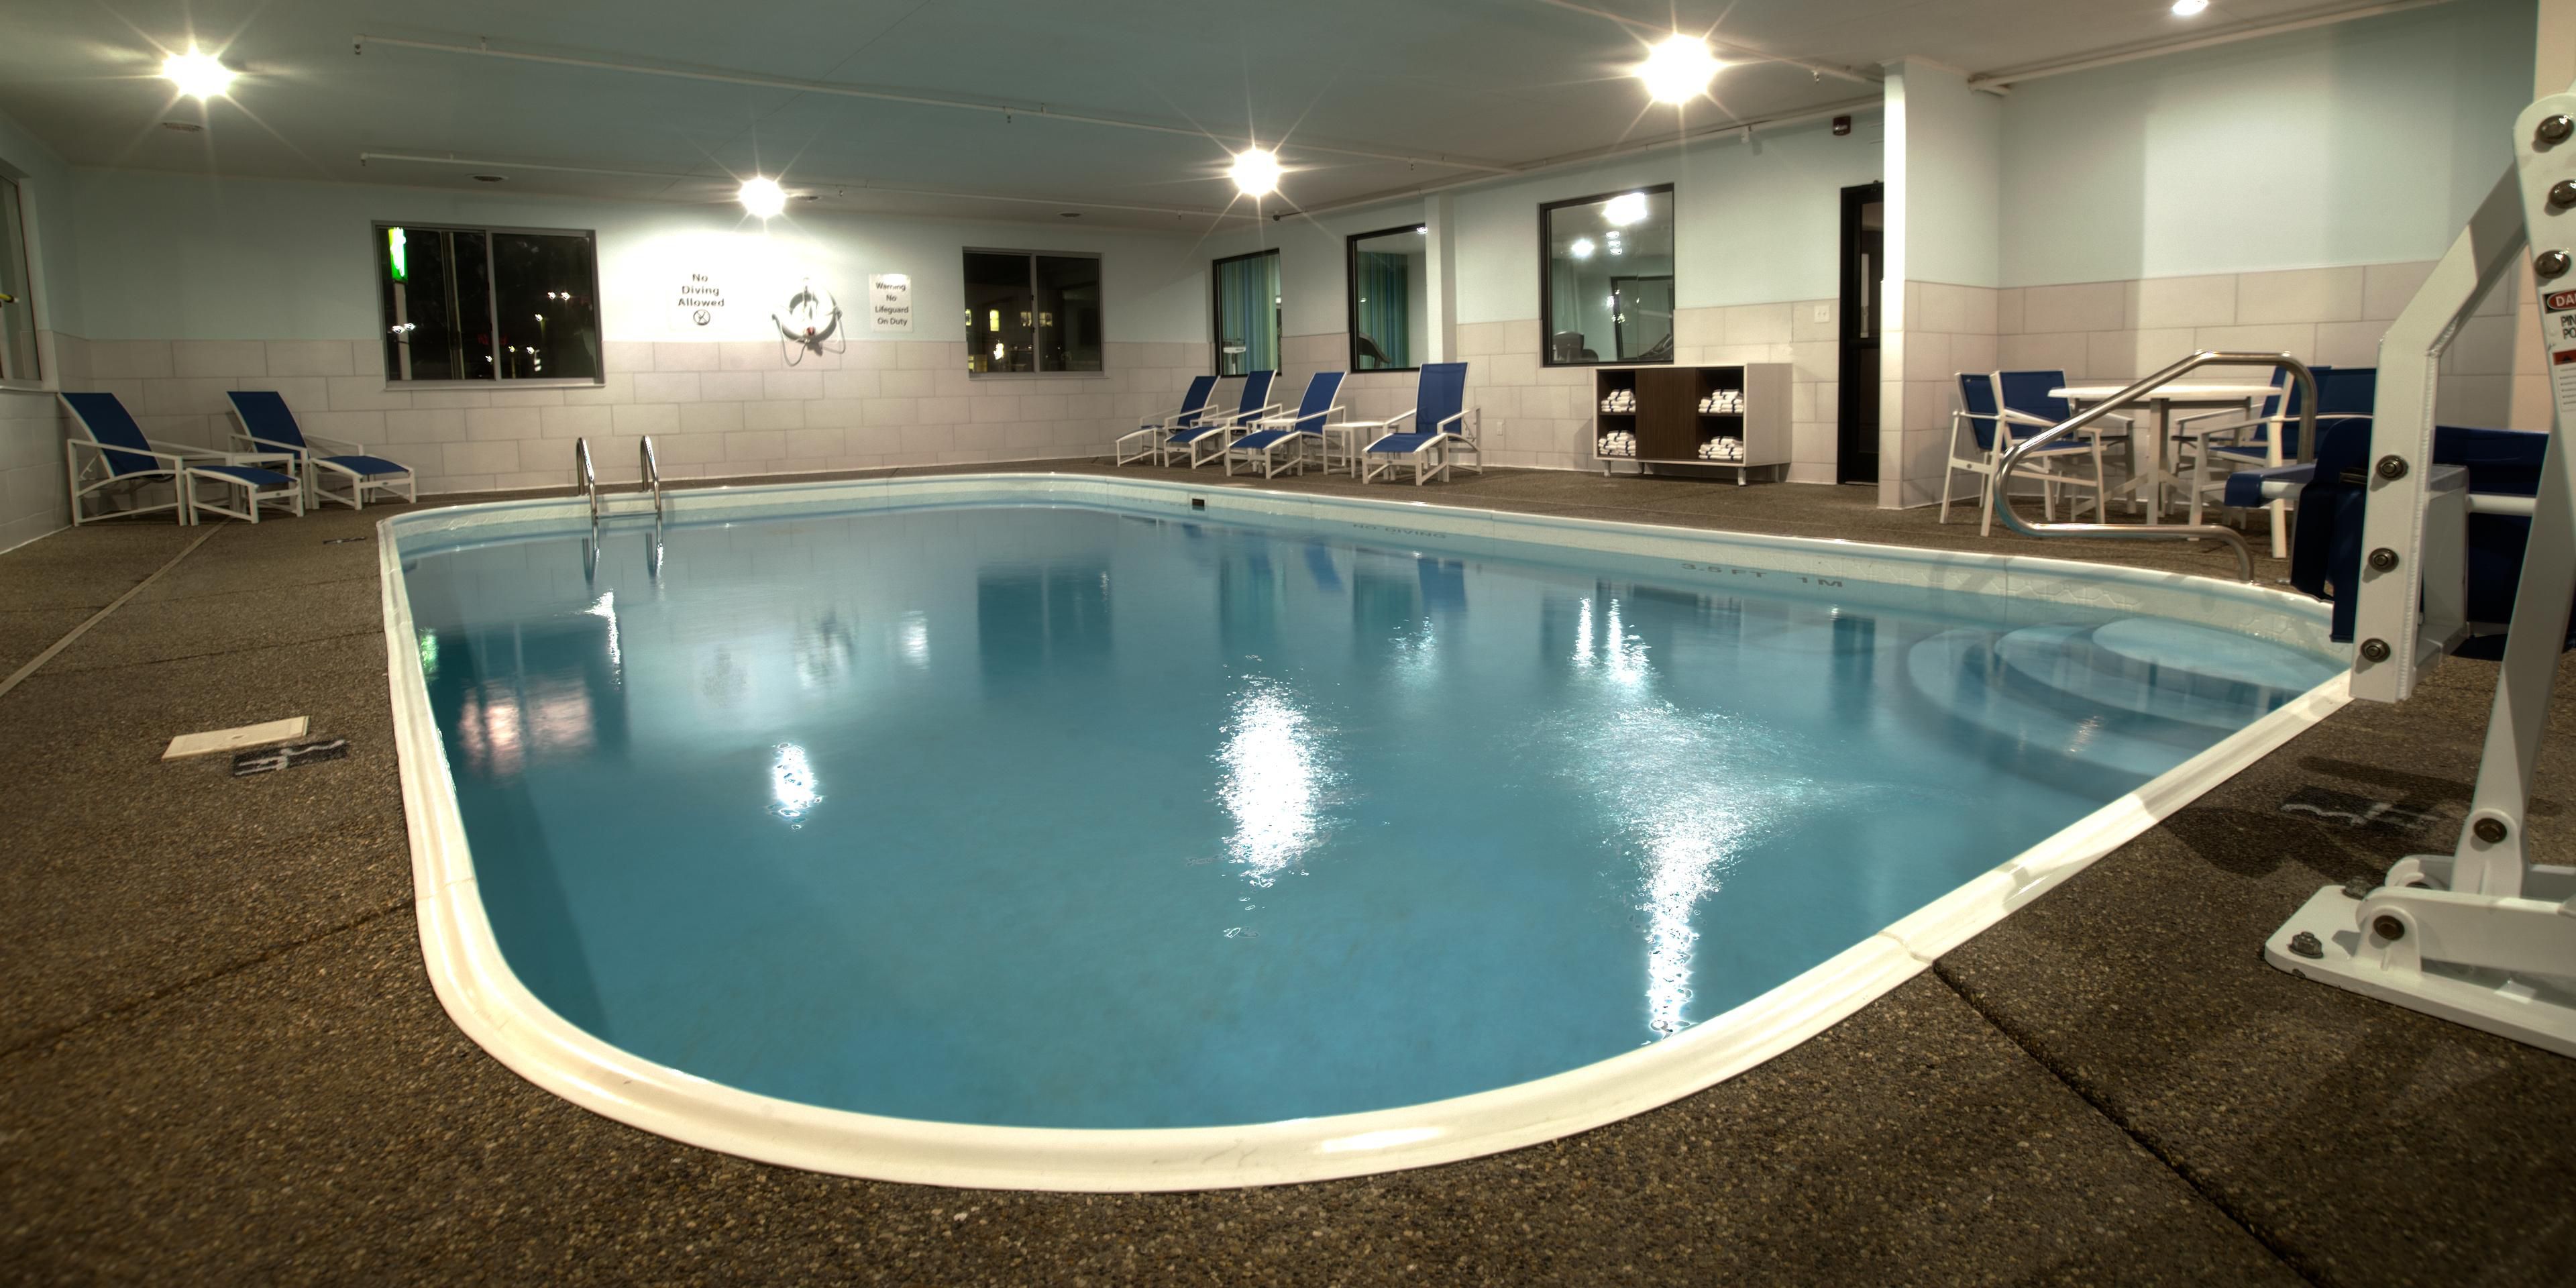 Enjoy our heated indoor pool during your stay.